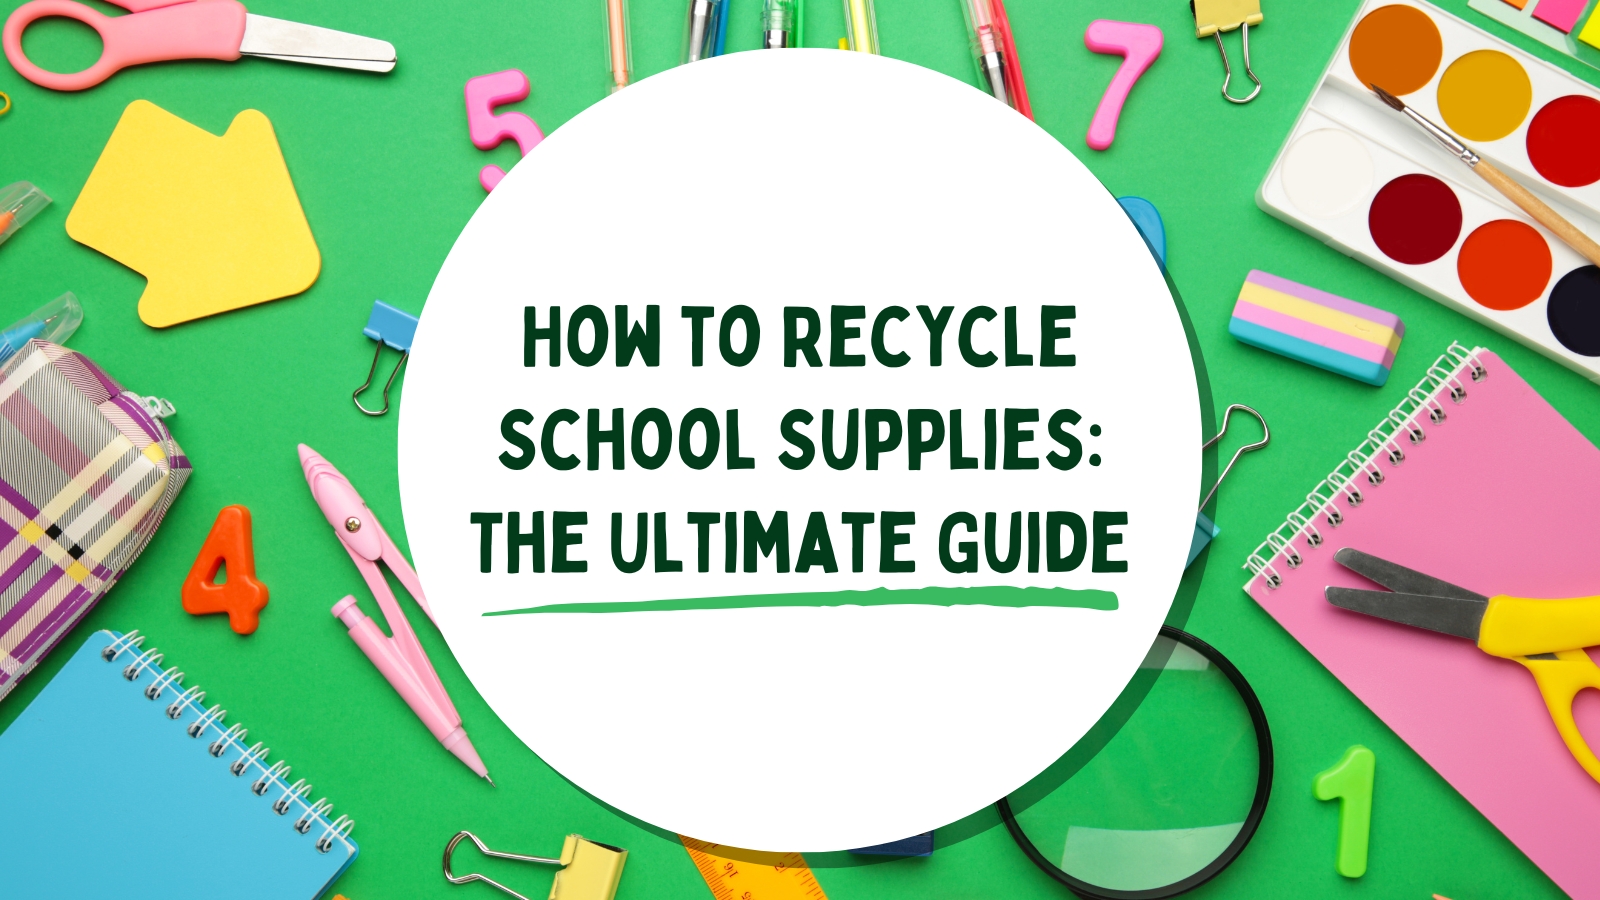 How To Recycle School Supplies: The Ultimate Guide